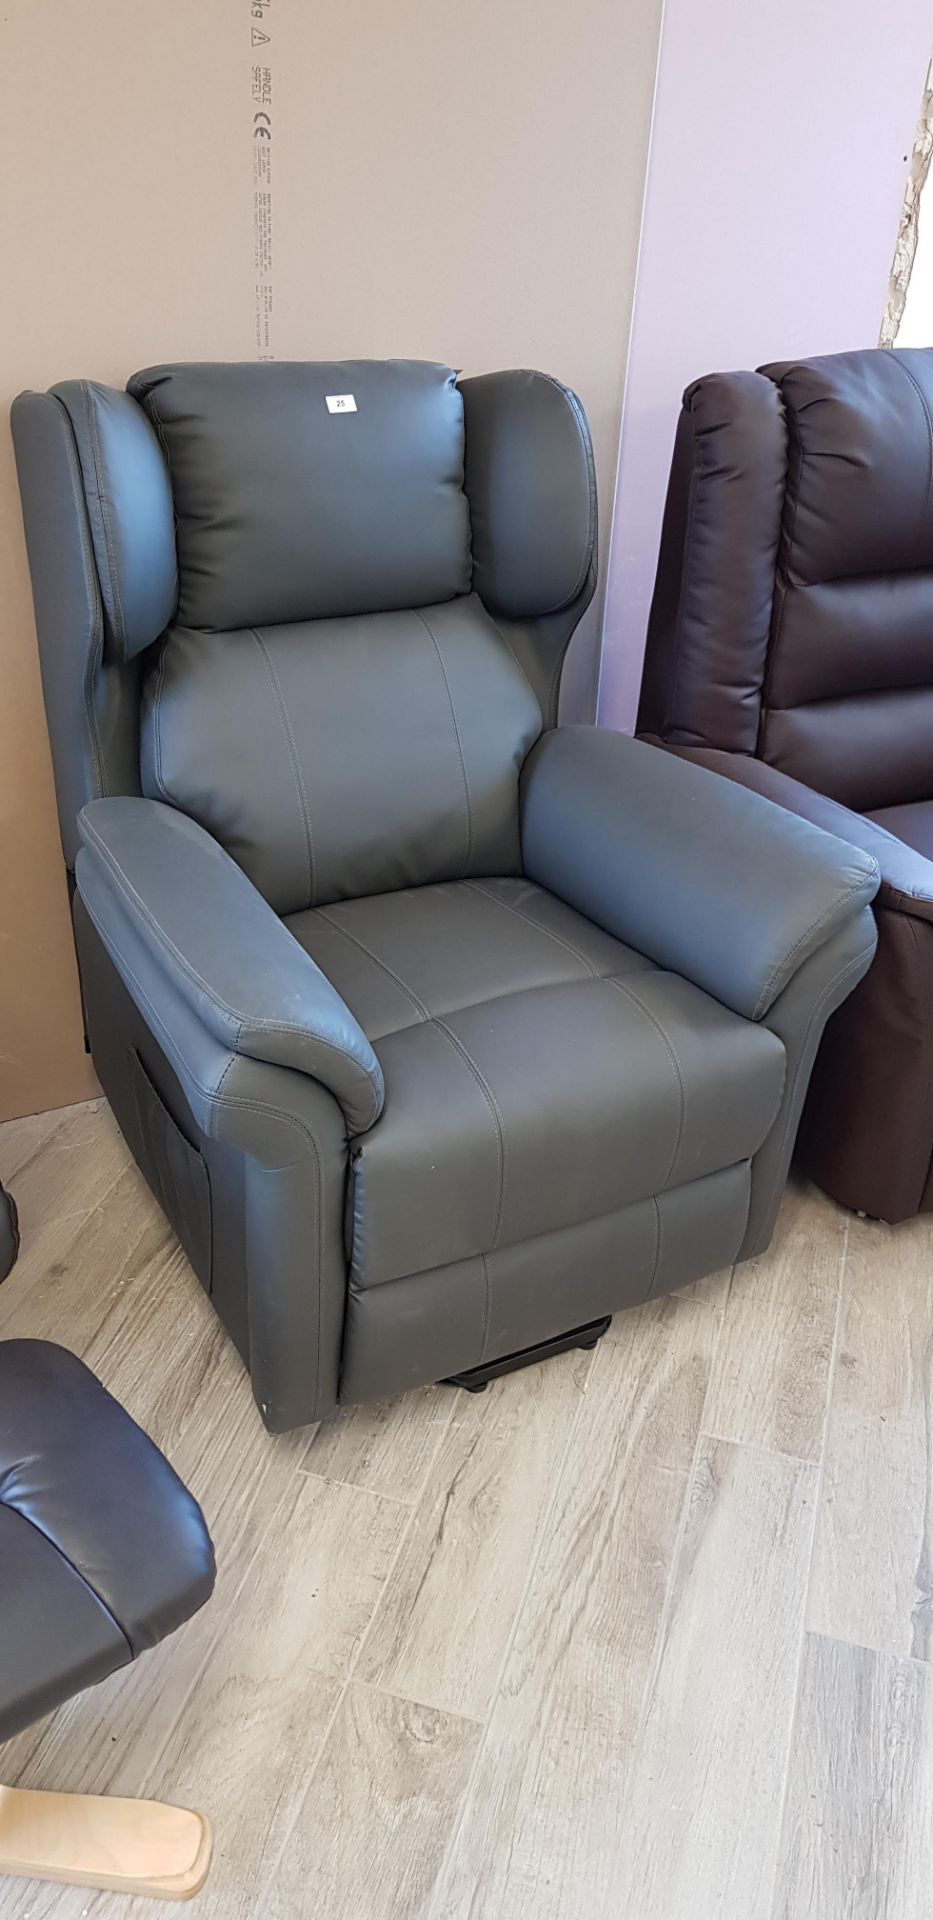 Grey electric recliner chair